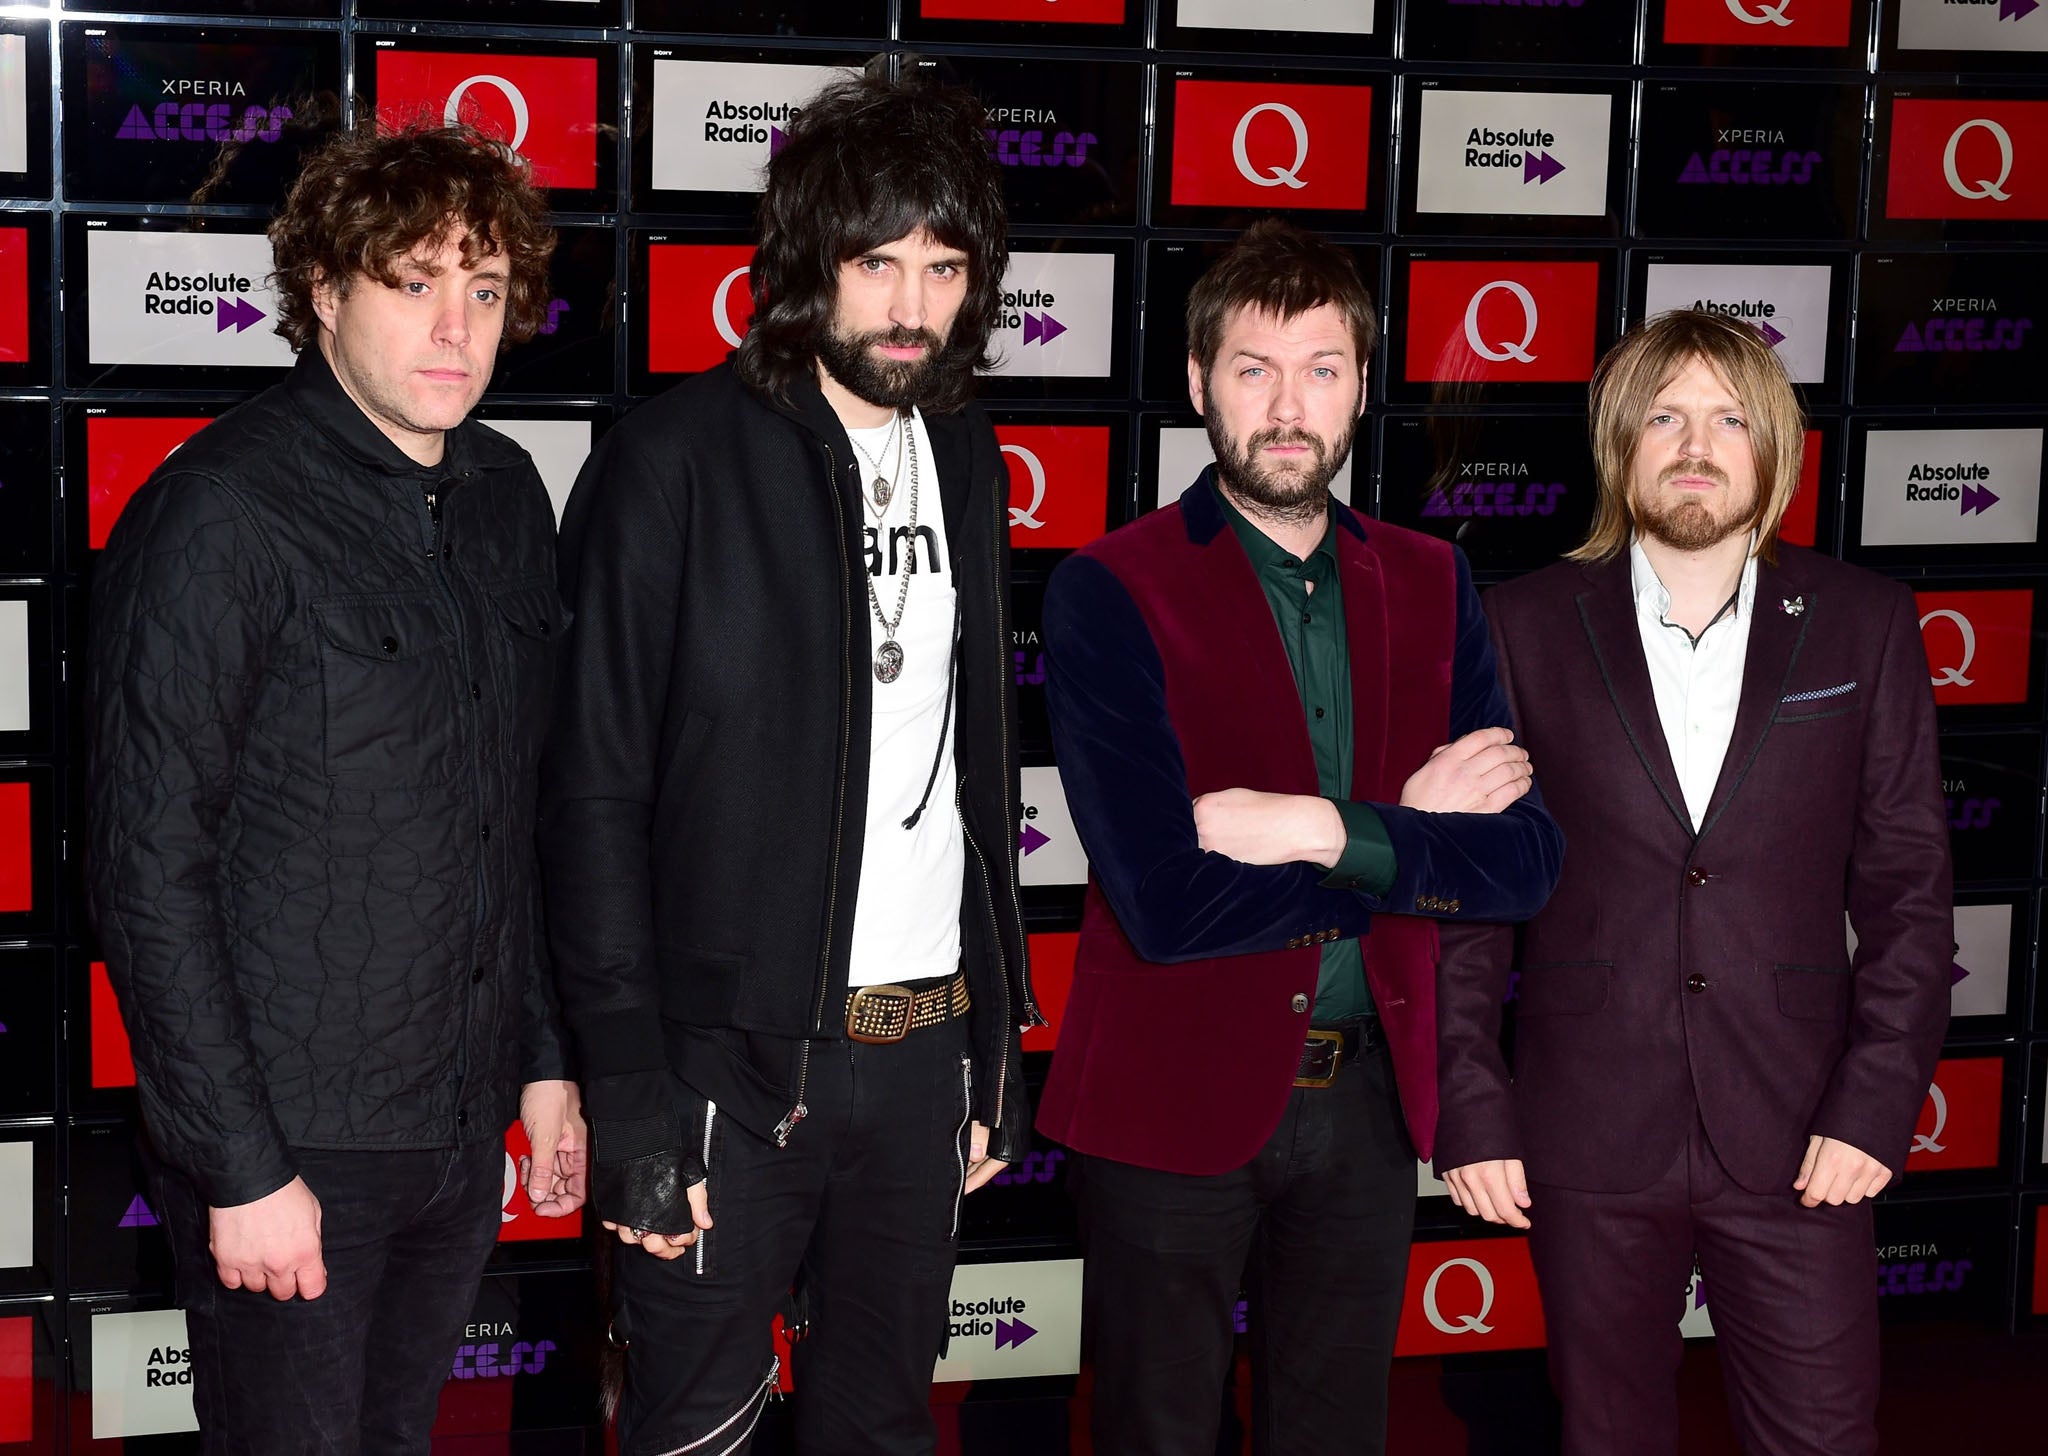 Ian Matthews, Sergio Pizzorno, Tom Meighan and Chris Edwards of Kasabian arriving at the Q Awards 2014